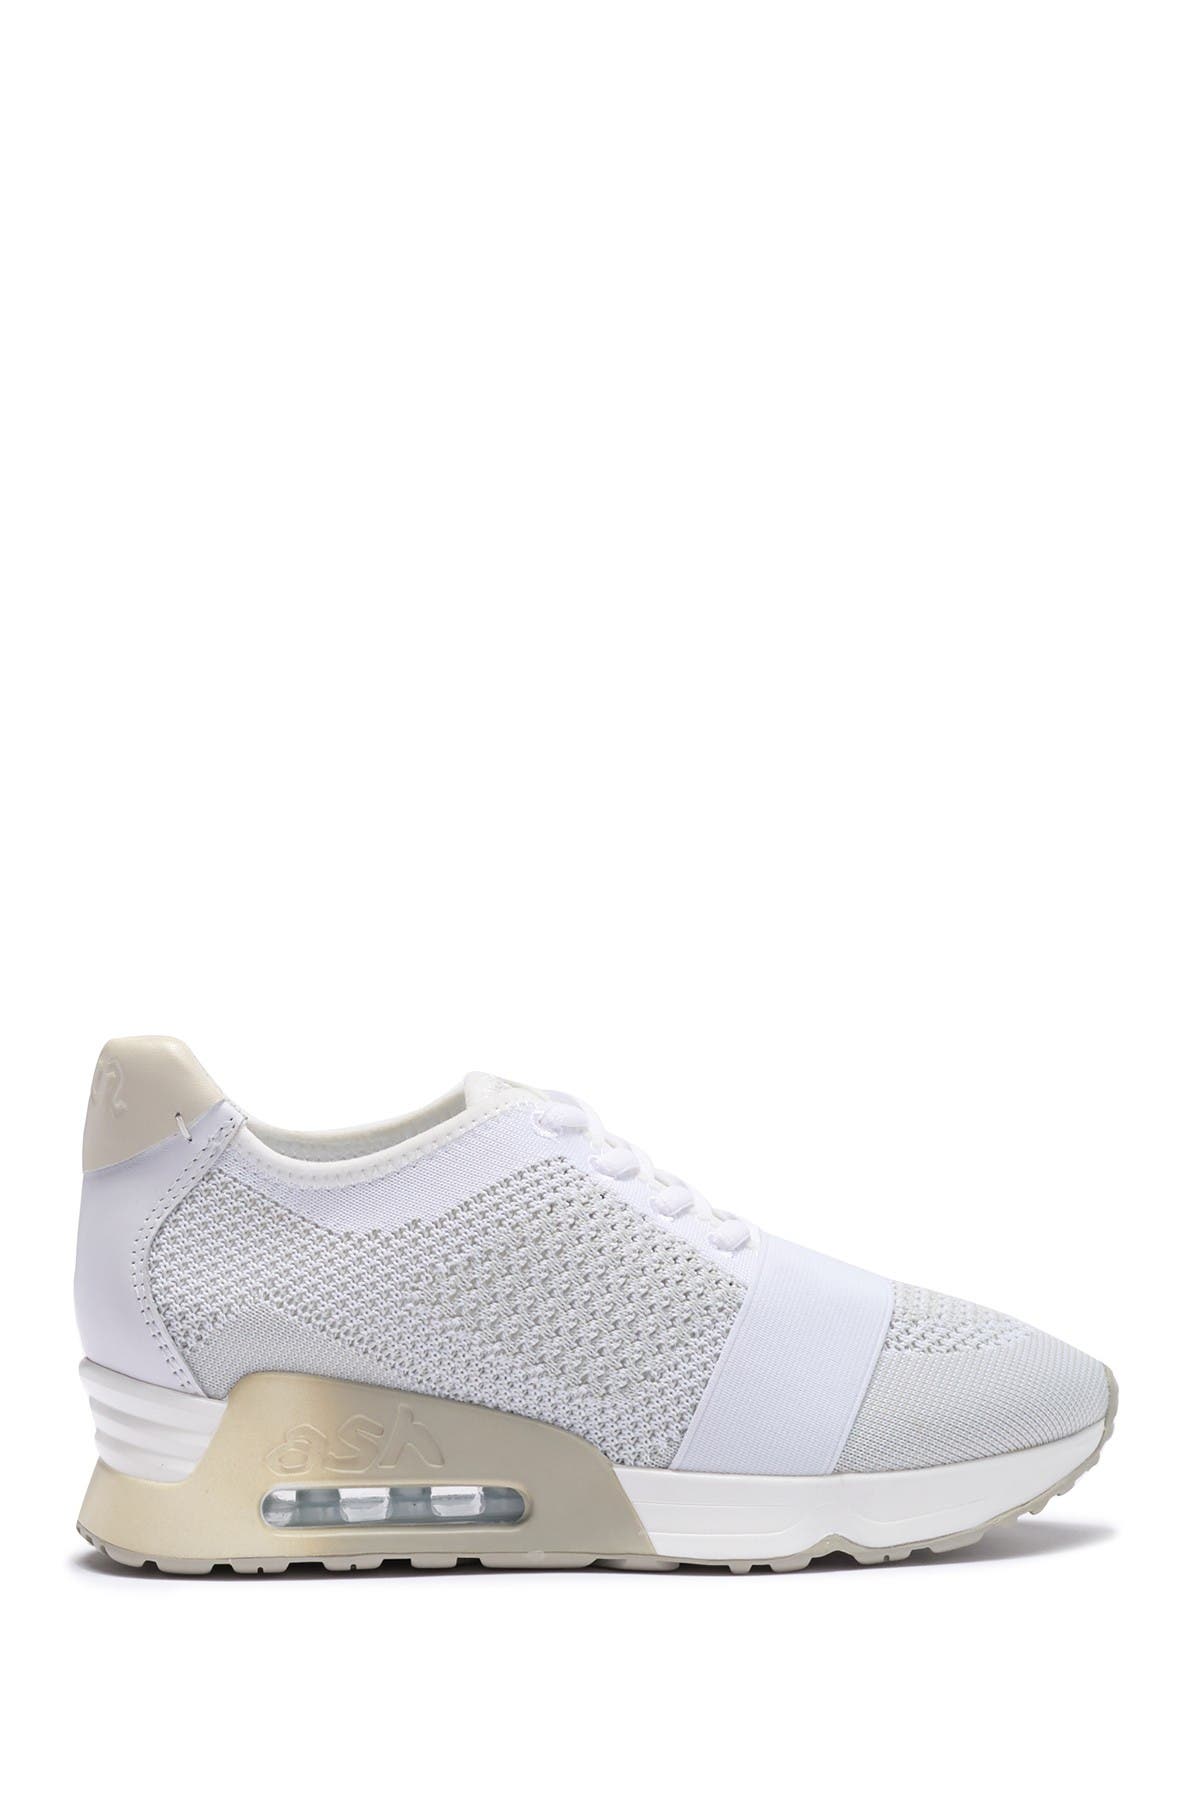 ash lacey wedge sneaker